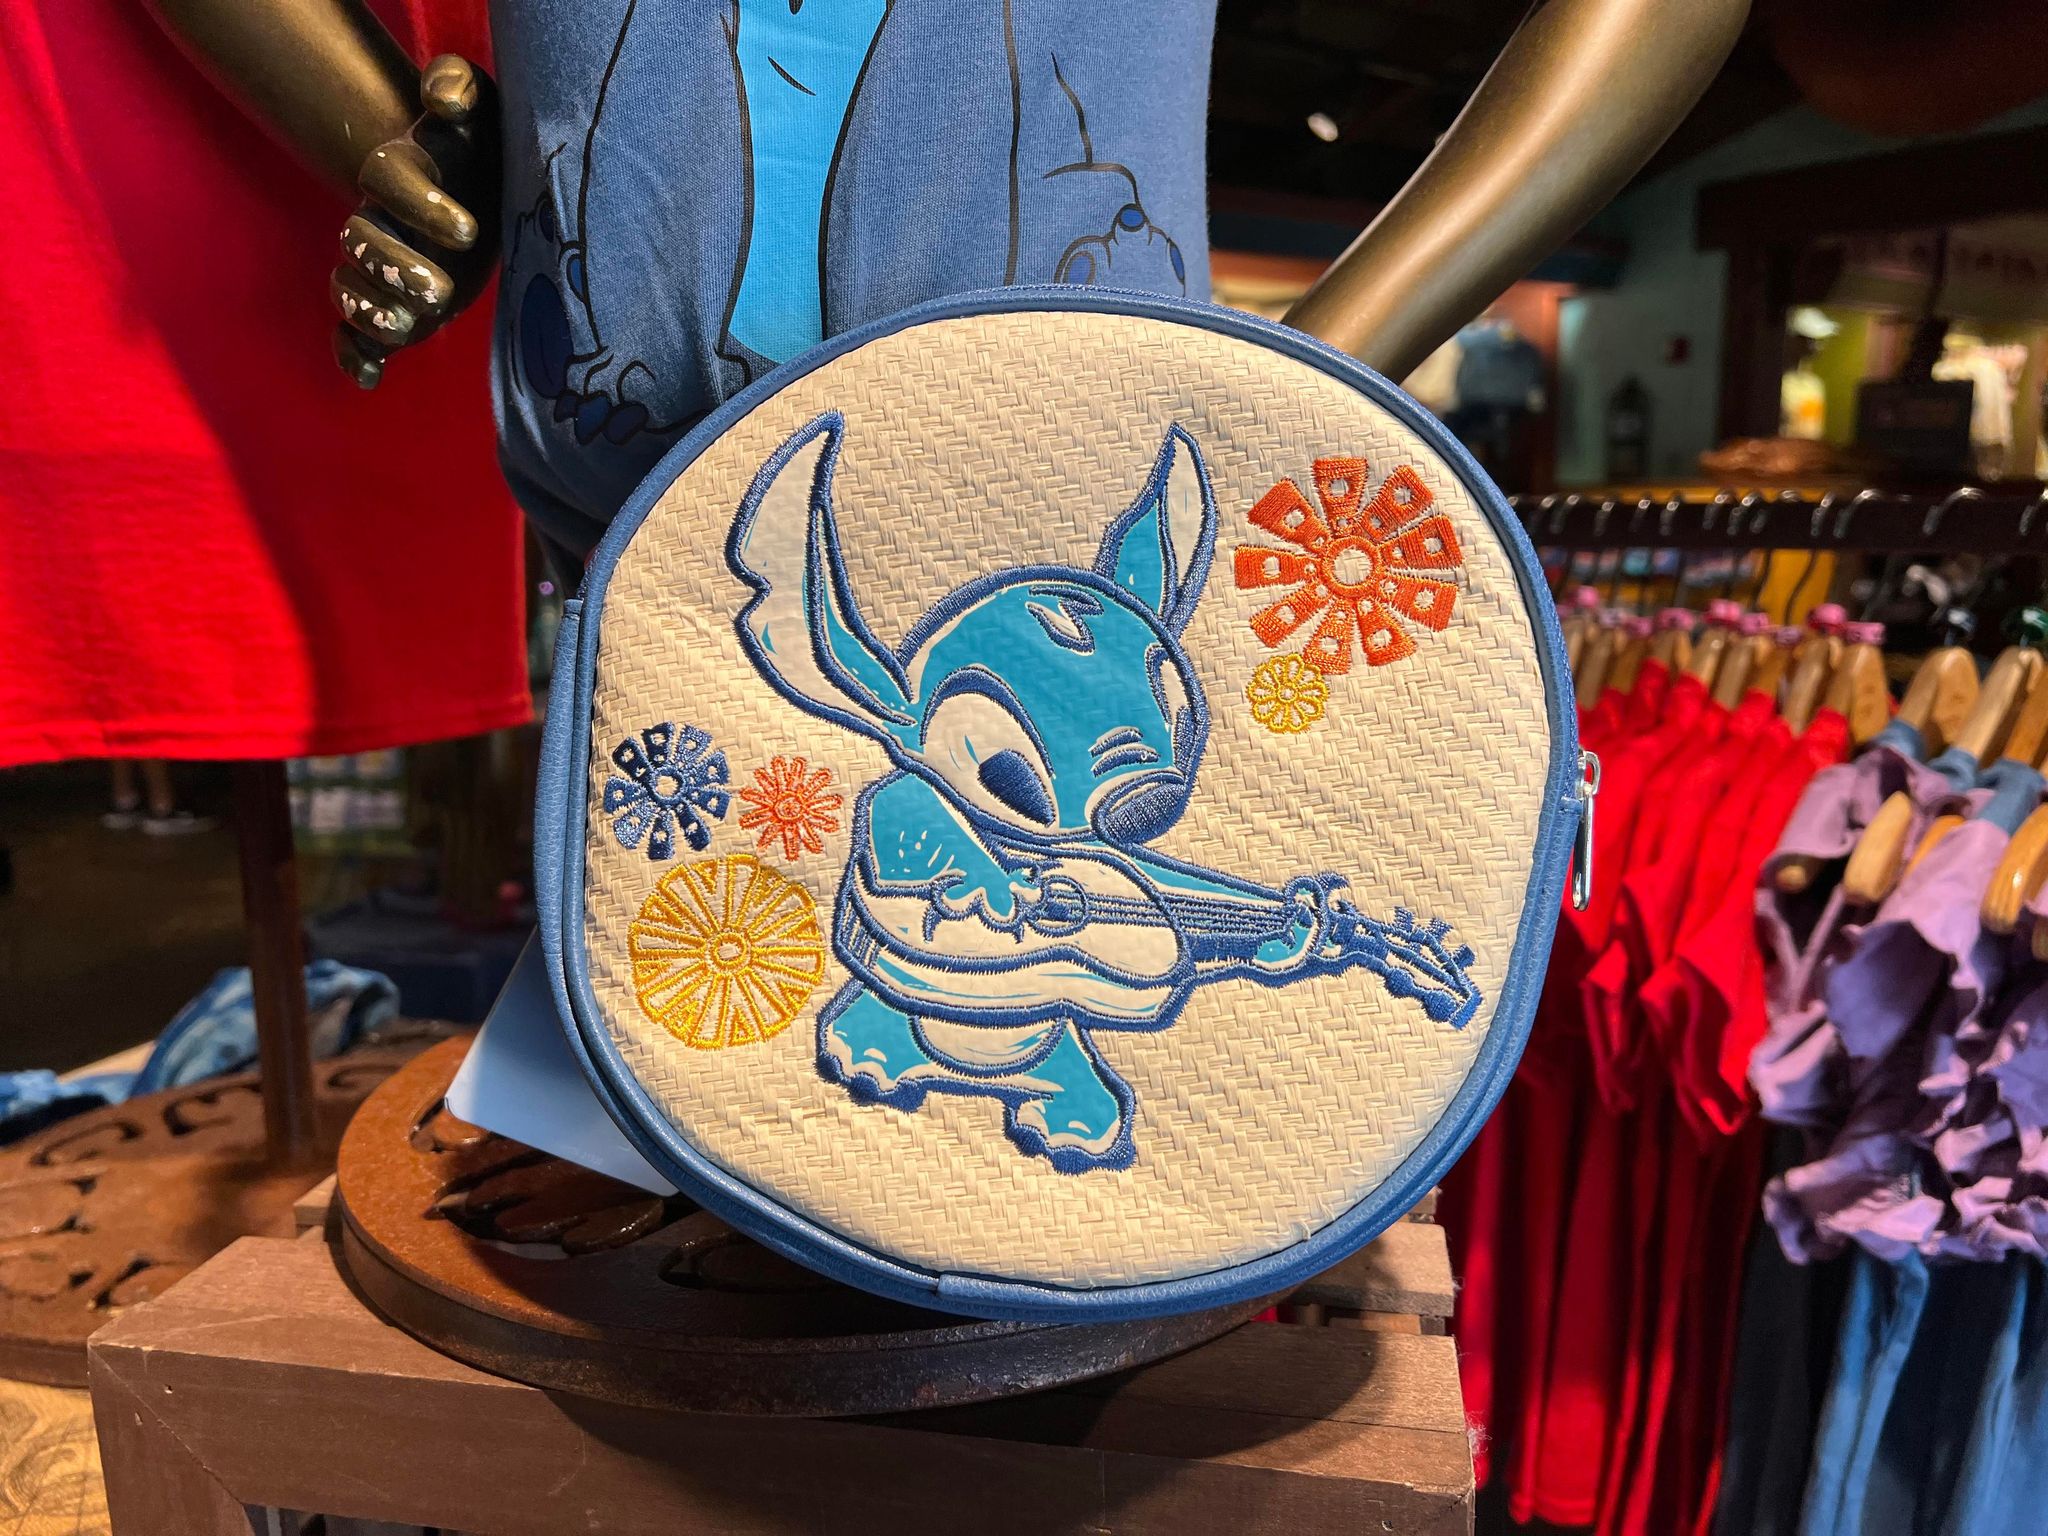 More Awesome Stitch Merchandise NOW Available at Discovery